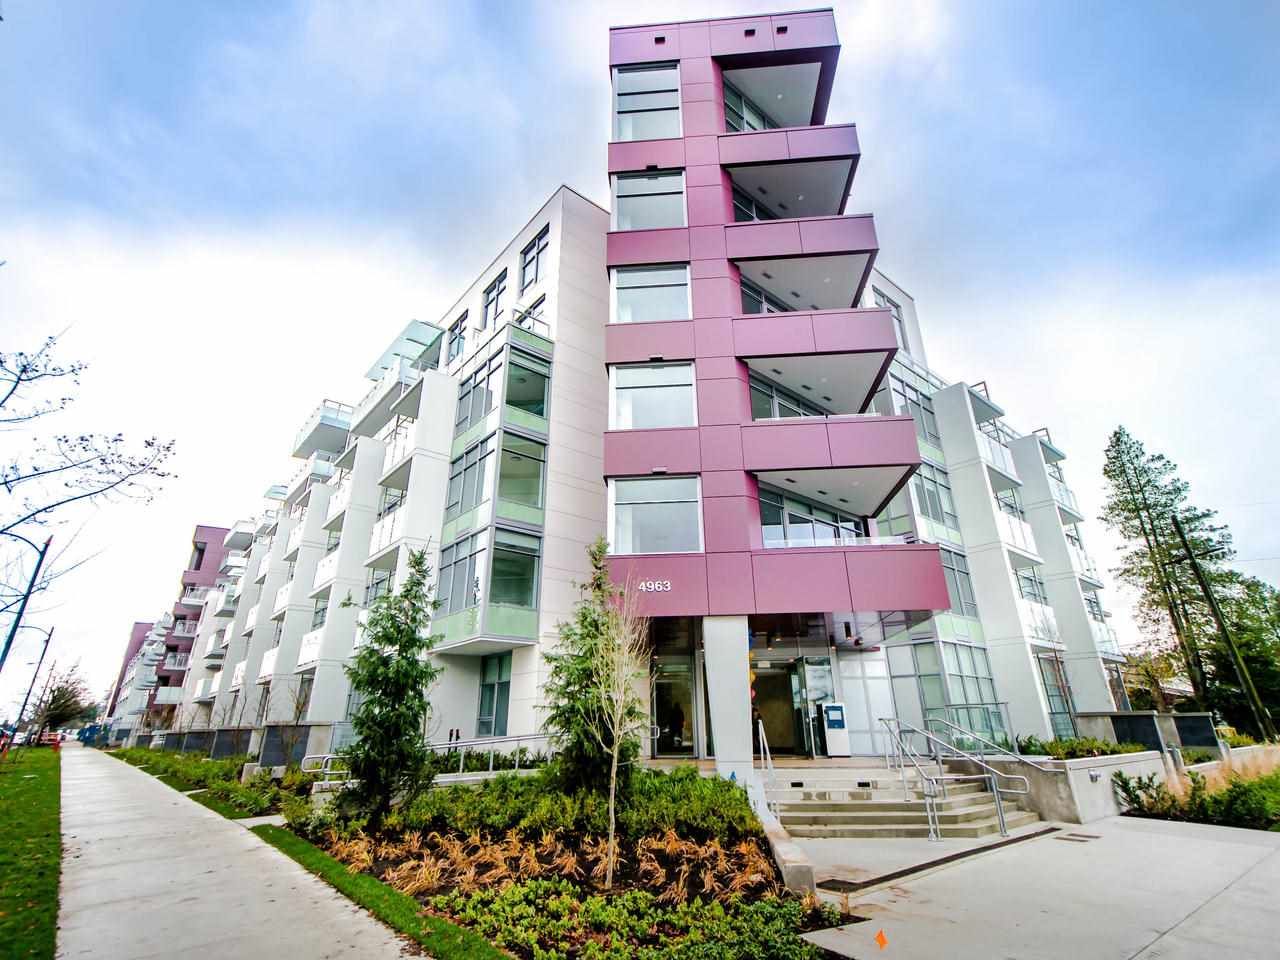 I have sold a property at 112 4963 CAMBIE ST in Vancouver
